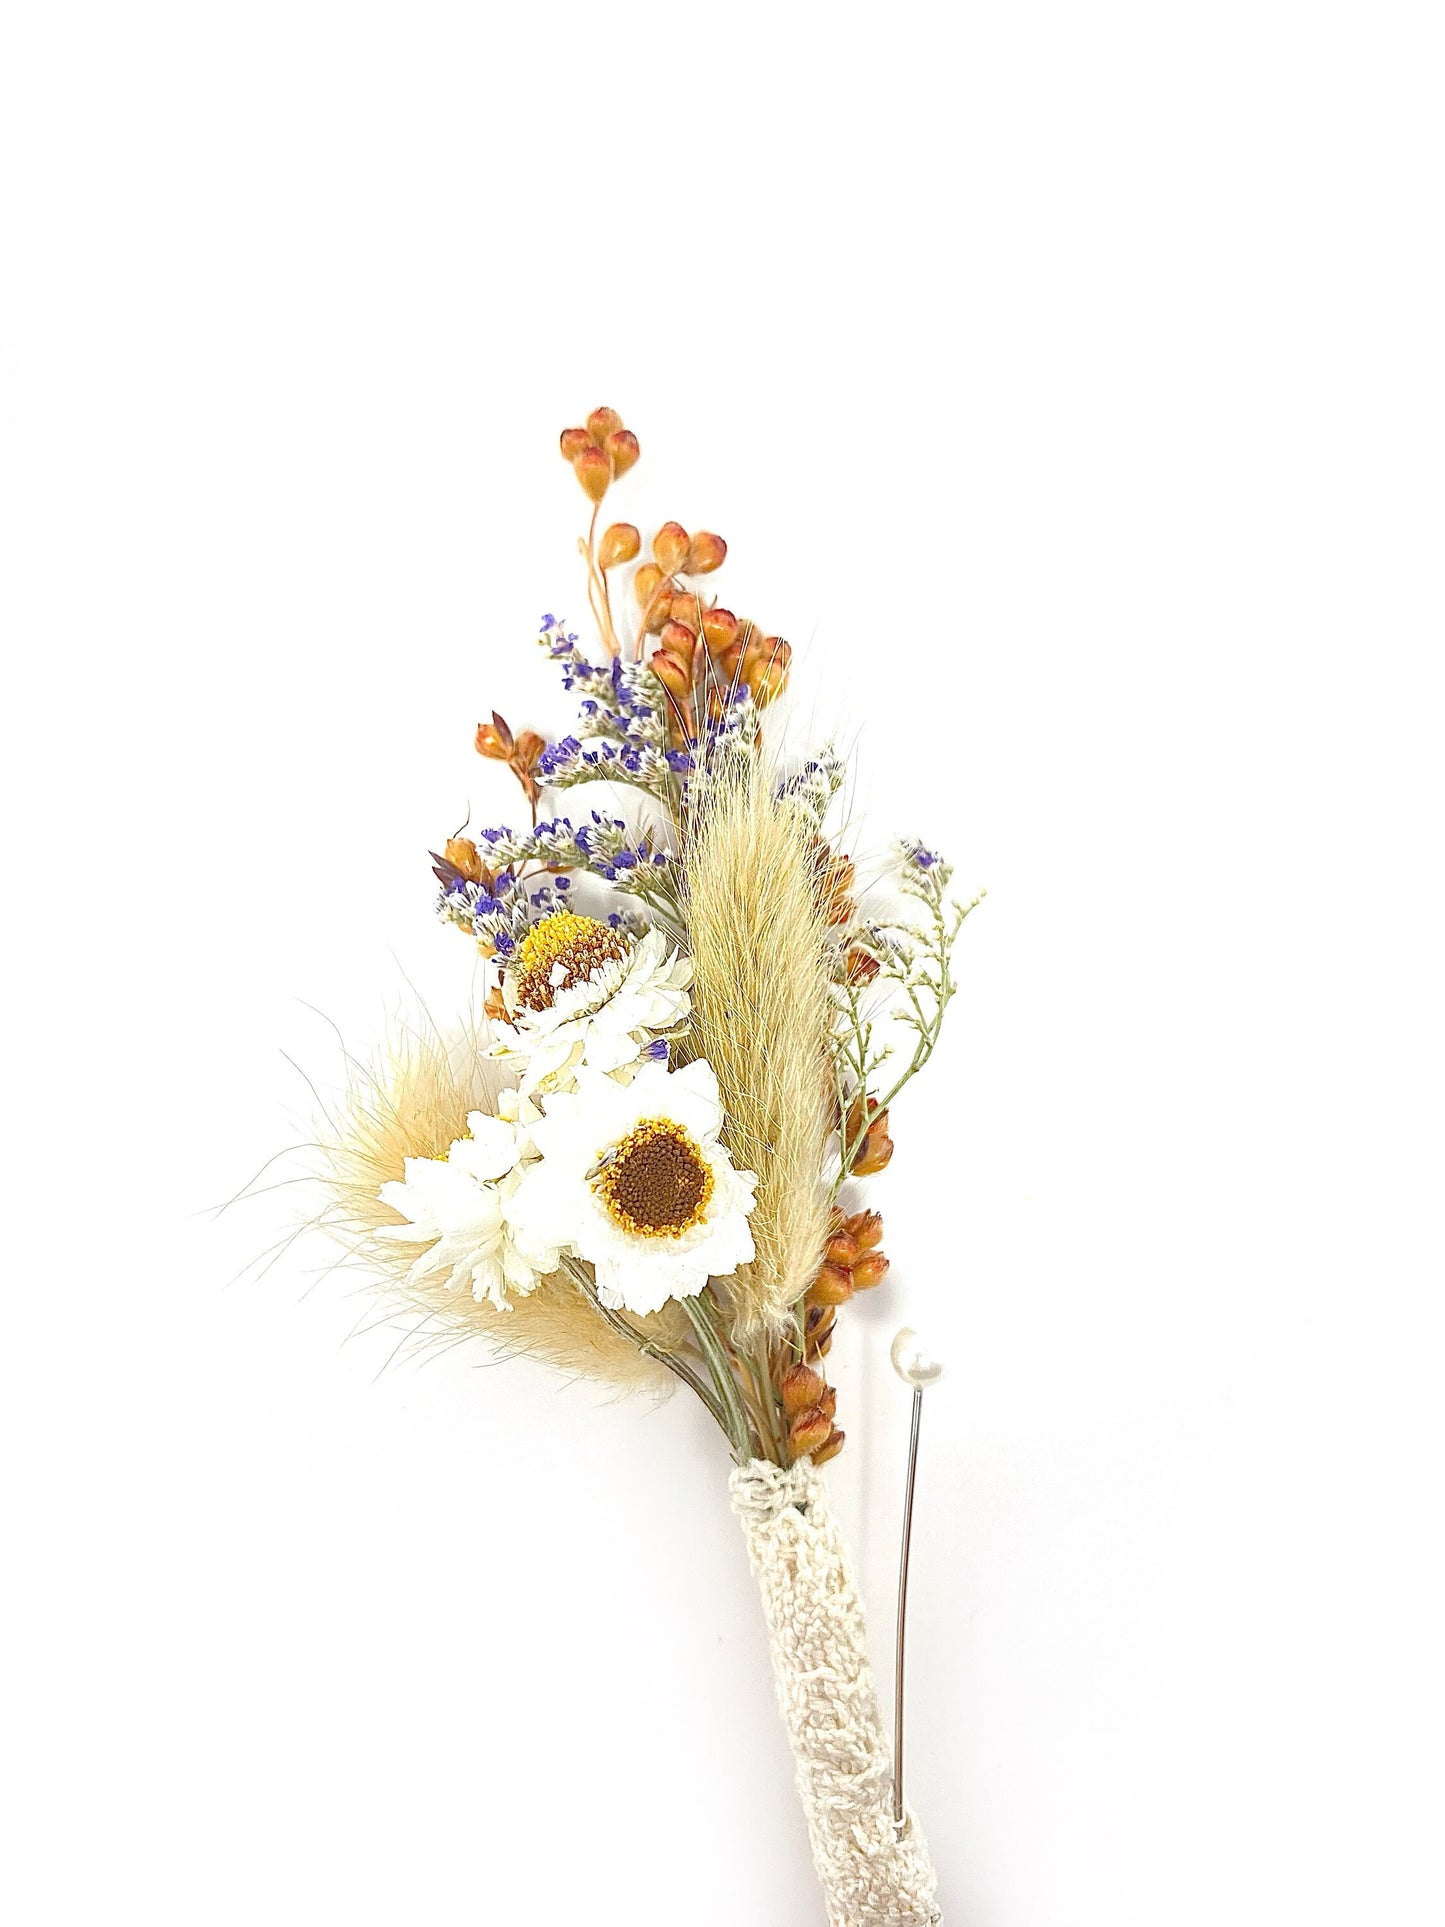 Wedding Boutonniere, Dried Flowers, Preserved Floral, Wedding Accessories, Bunny Tails, Ammobium